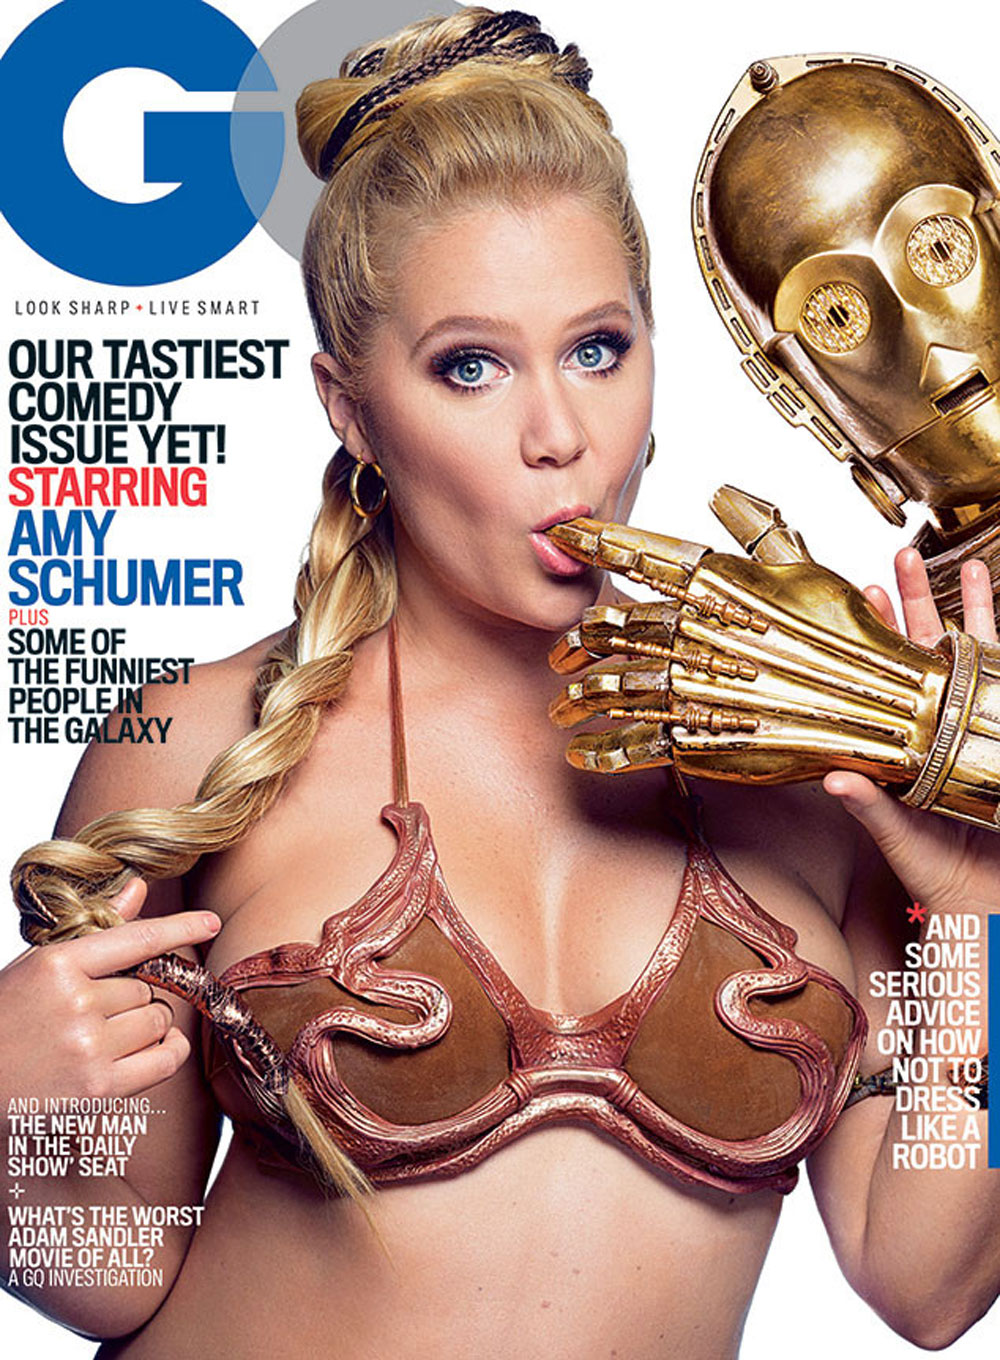 is amy schumers sexy star wars cover the best nerd porn of all time